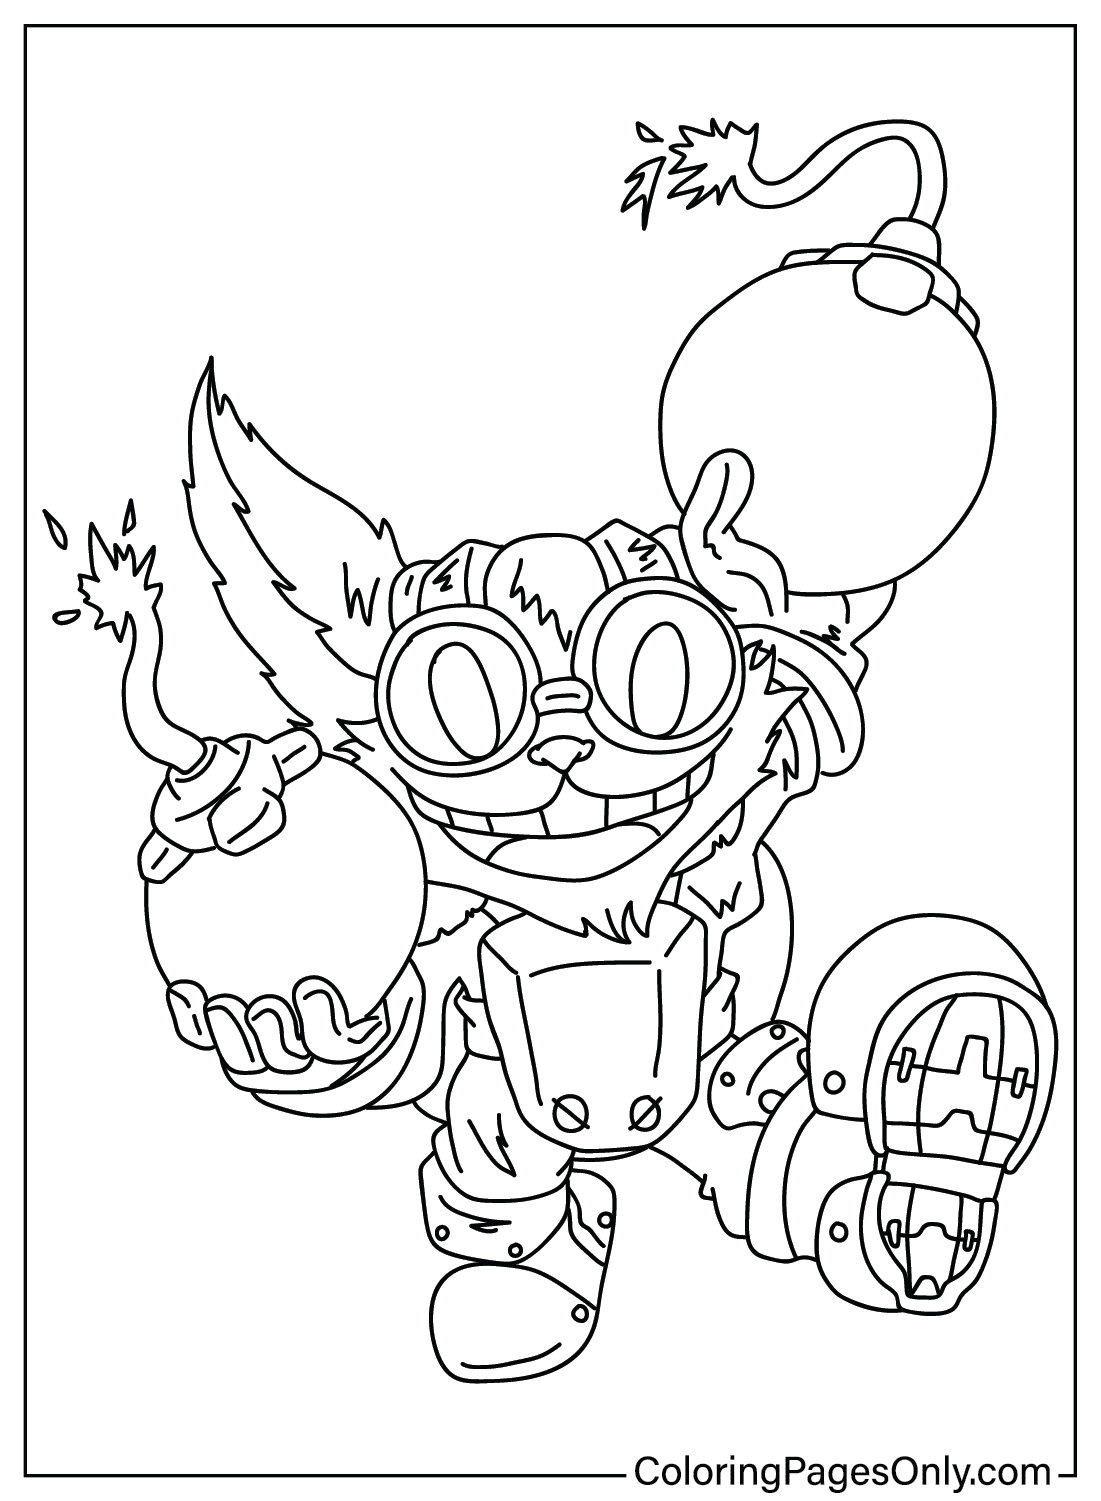 Veigar Teamfight Tactics Coloring Page from Teamfight Tactics